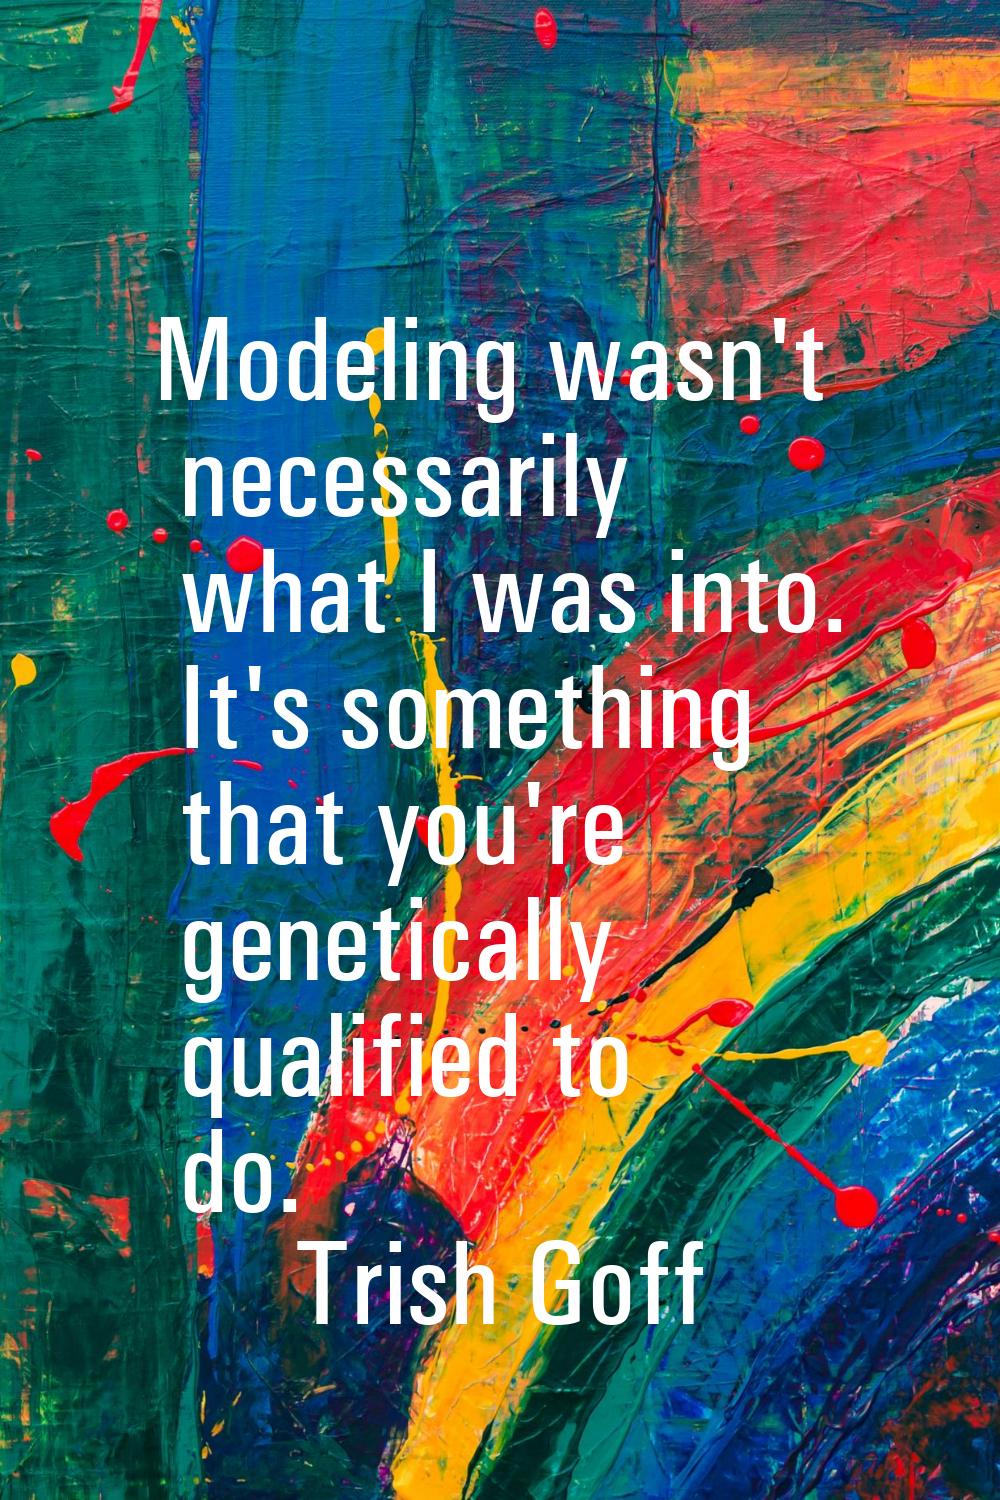 Modeling wasn't necessarily what I was into. It's something that you're genetically qualified to do